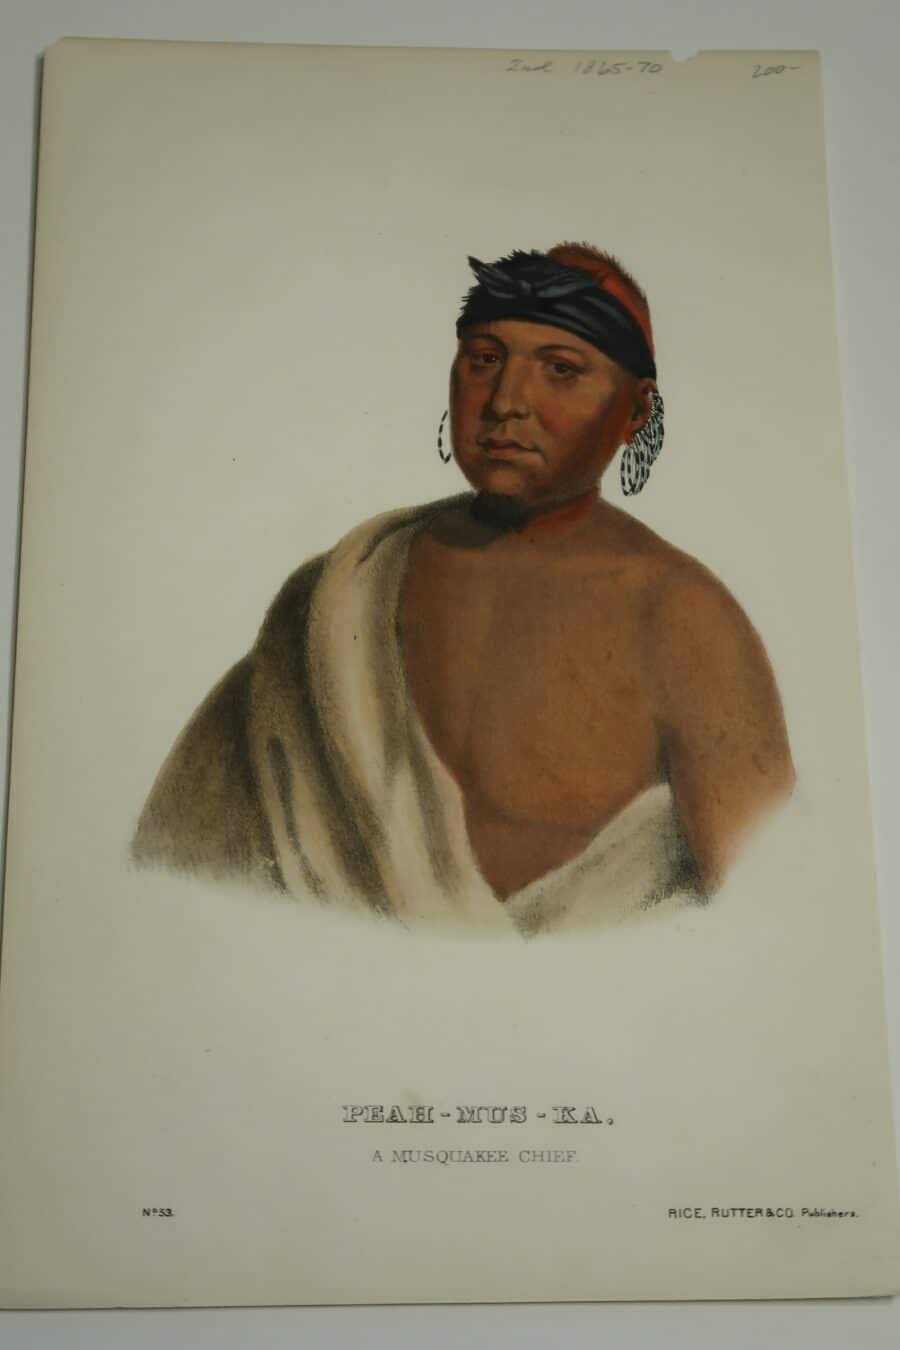 PEAH-MUS-KA, is a Musquakee Chief, Rice-Rutter & Co. Publishers, Tribes of North America.